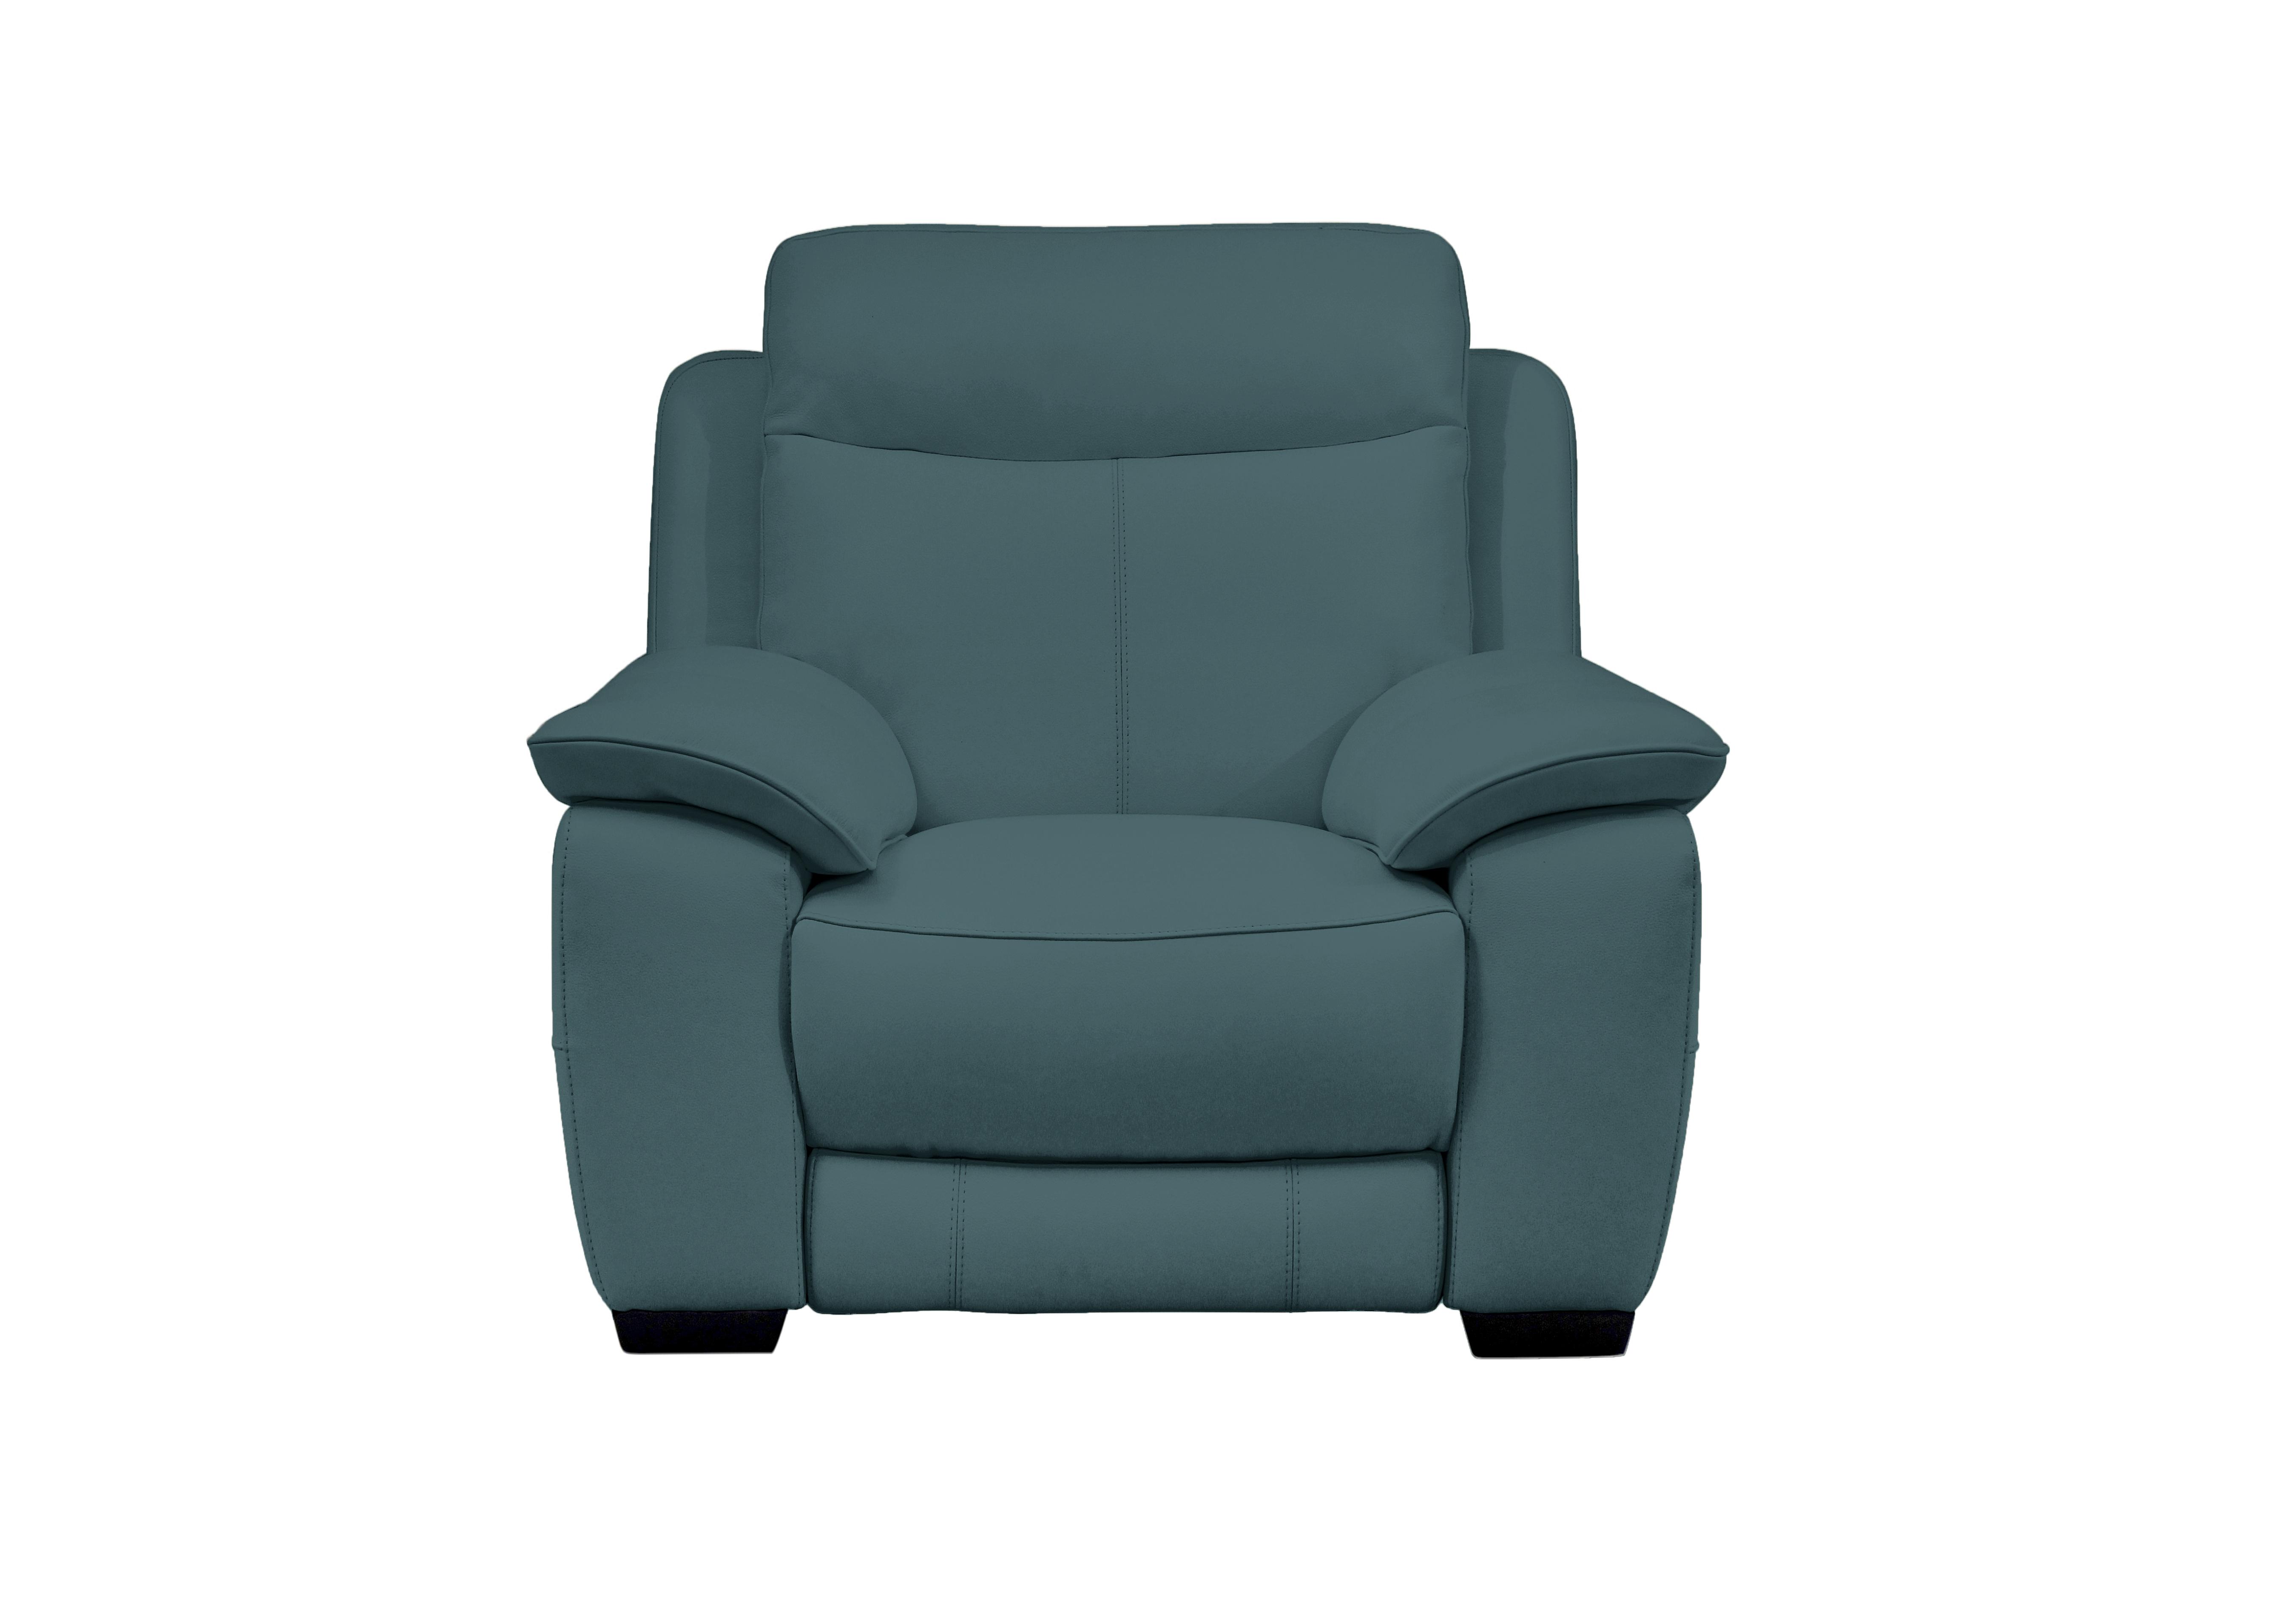 Starlight Express Leather Power Armchair with Power Headrest in Bv-301e Lake Green on Furniture Village